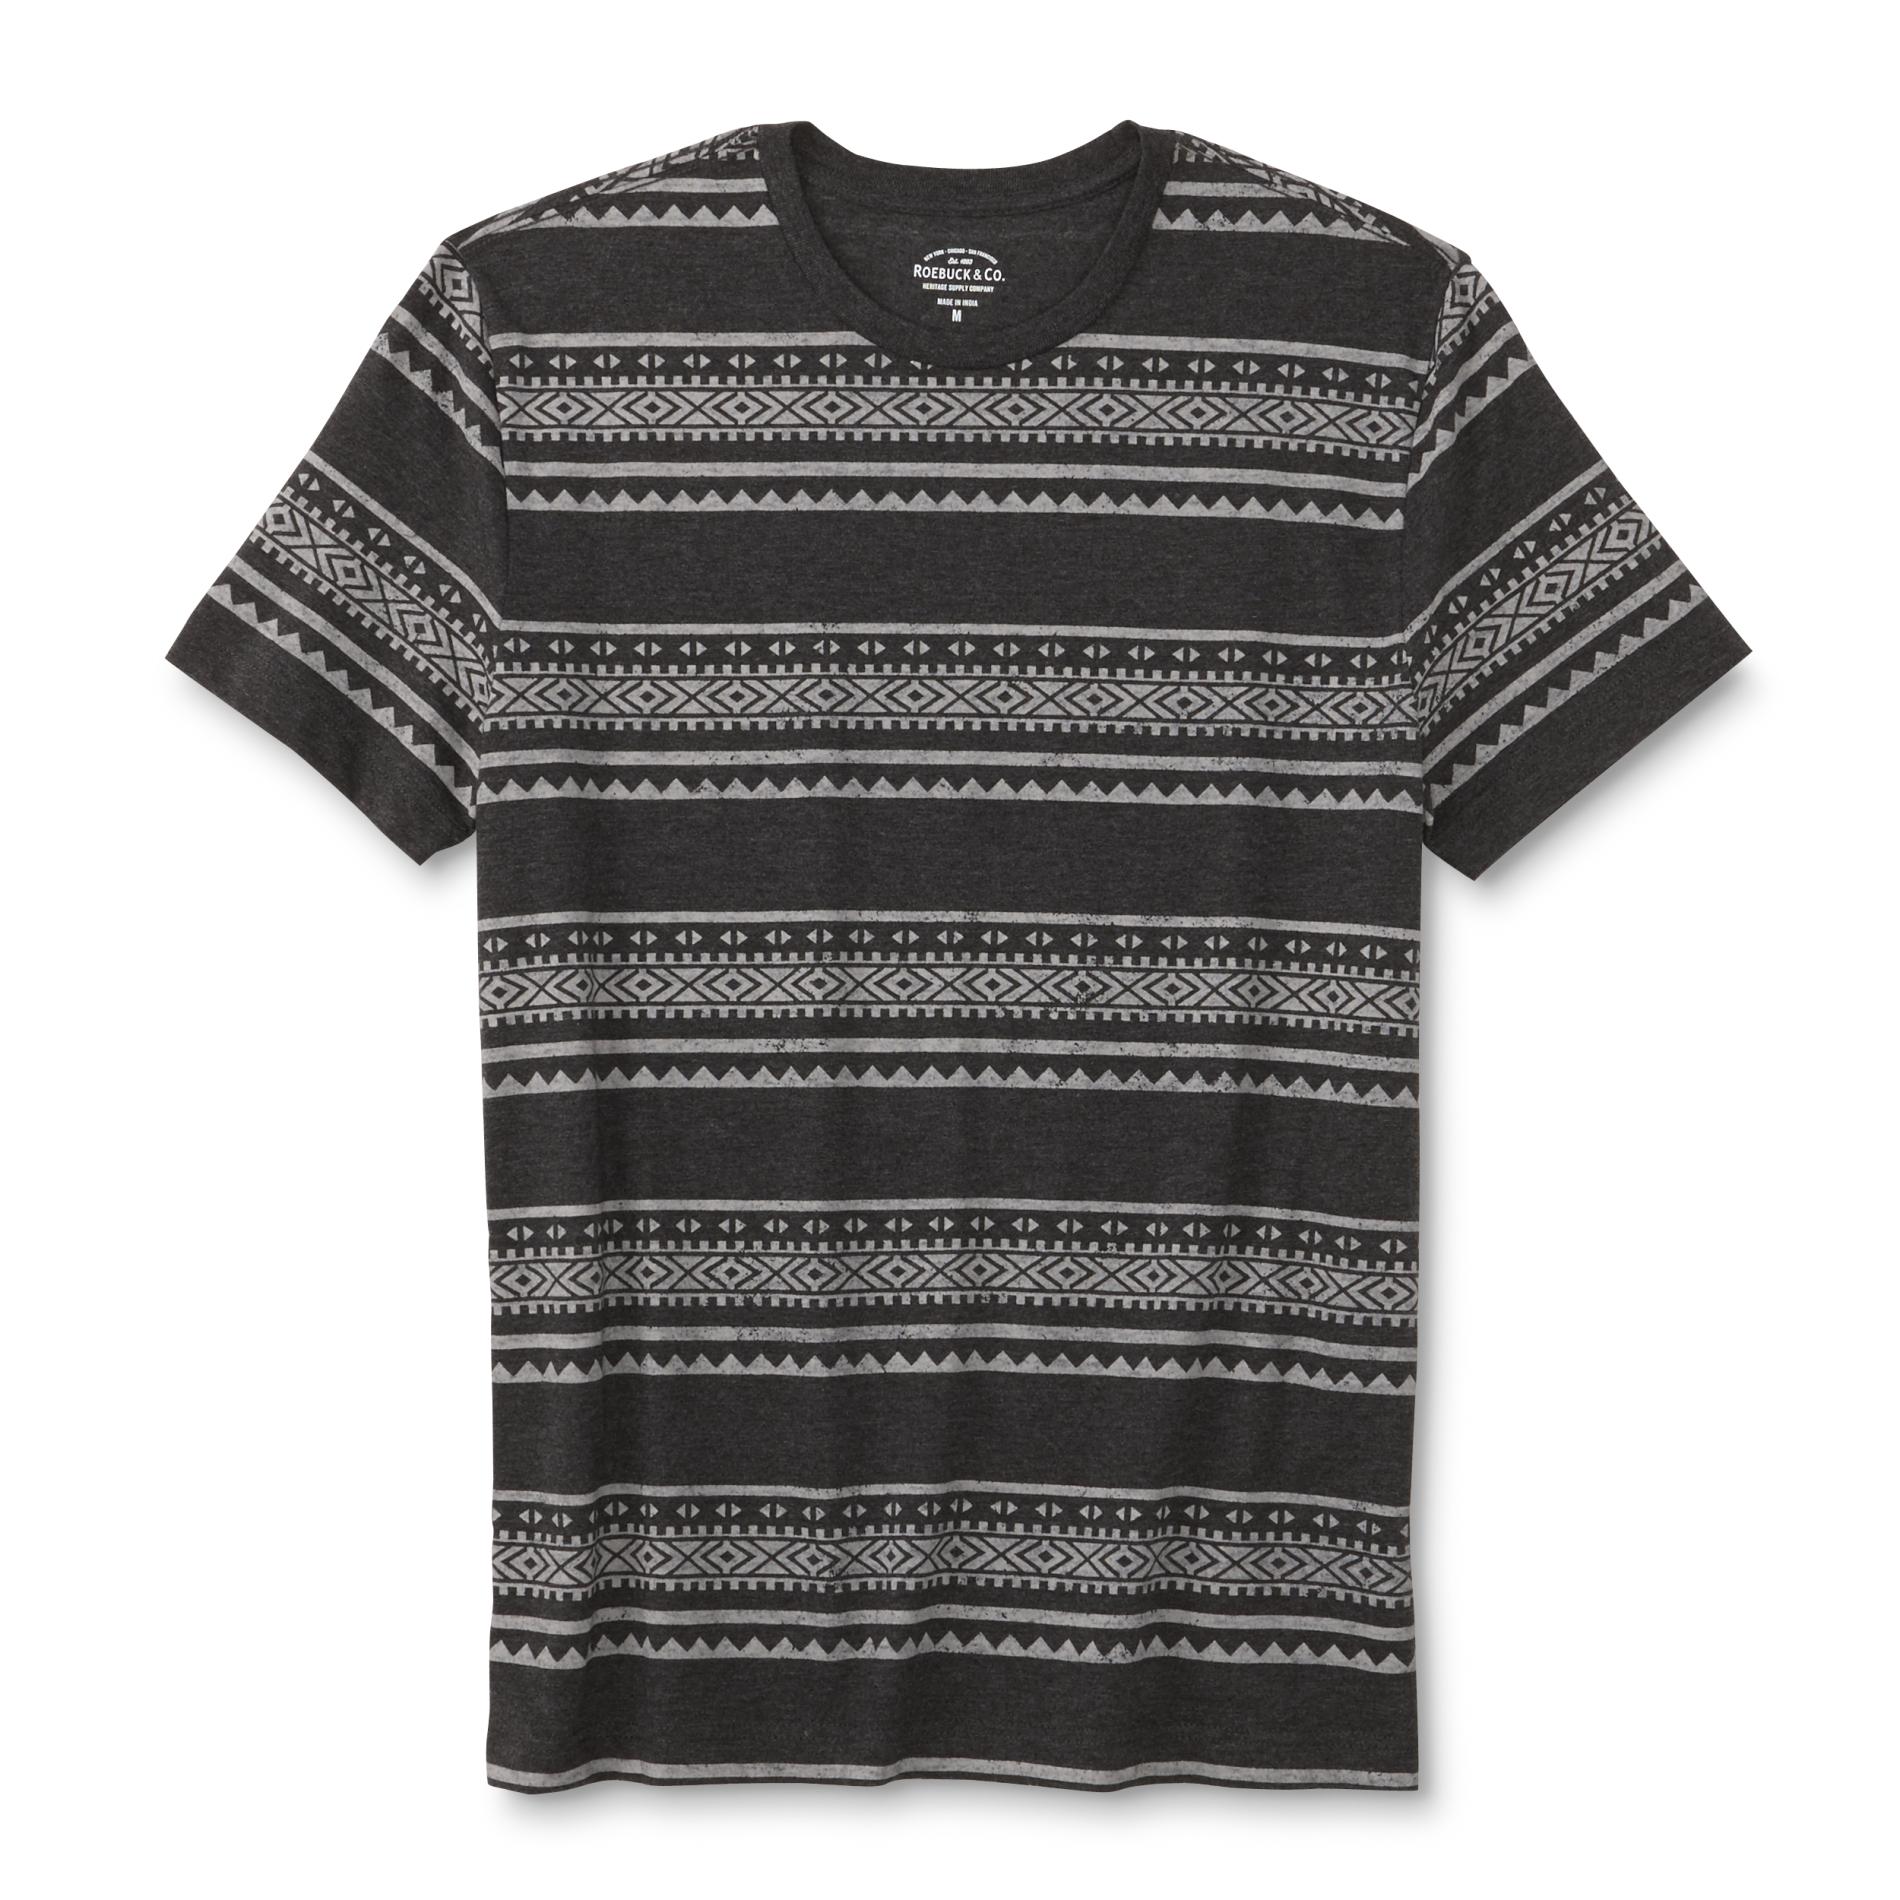 Roebuck & Co. Young Men's Graphic T-Shirt - Tribal Stripes